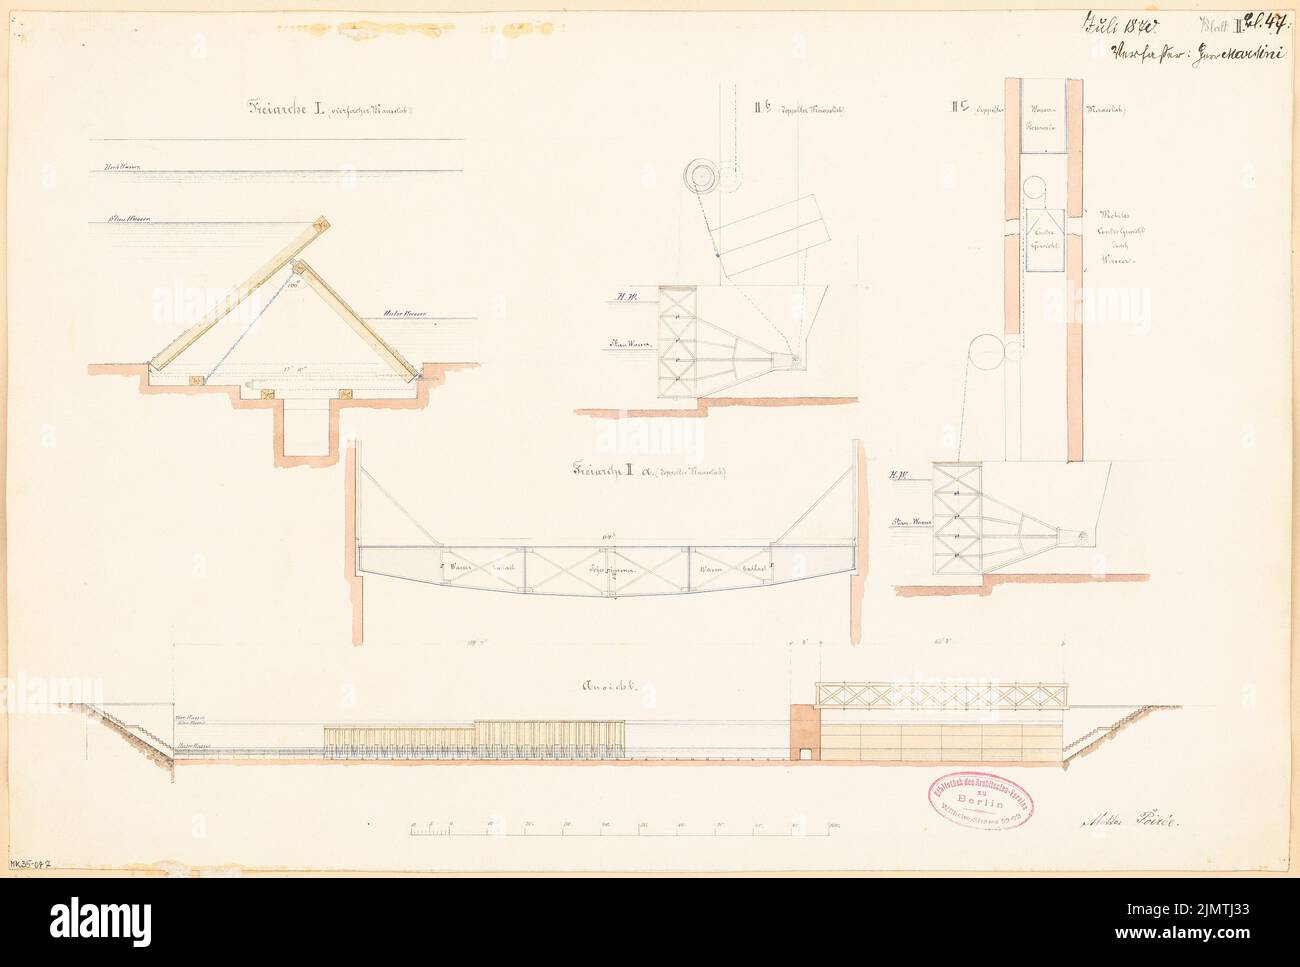 Martini Peter (born 1839), self -regulating weir. Monthly competition July 1870 (07.1870): floor plan, recourse back view (against the direction of the river), 2 cross sections; Scale bar. Tusche watercolor on the box, 34.3 x 50.7 cm (including scan edges) Martini Peter  (geb. 1839): Selbstregulierendes Wehr. Monatskonkurrenz Juli 1870 Stock Photo